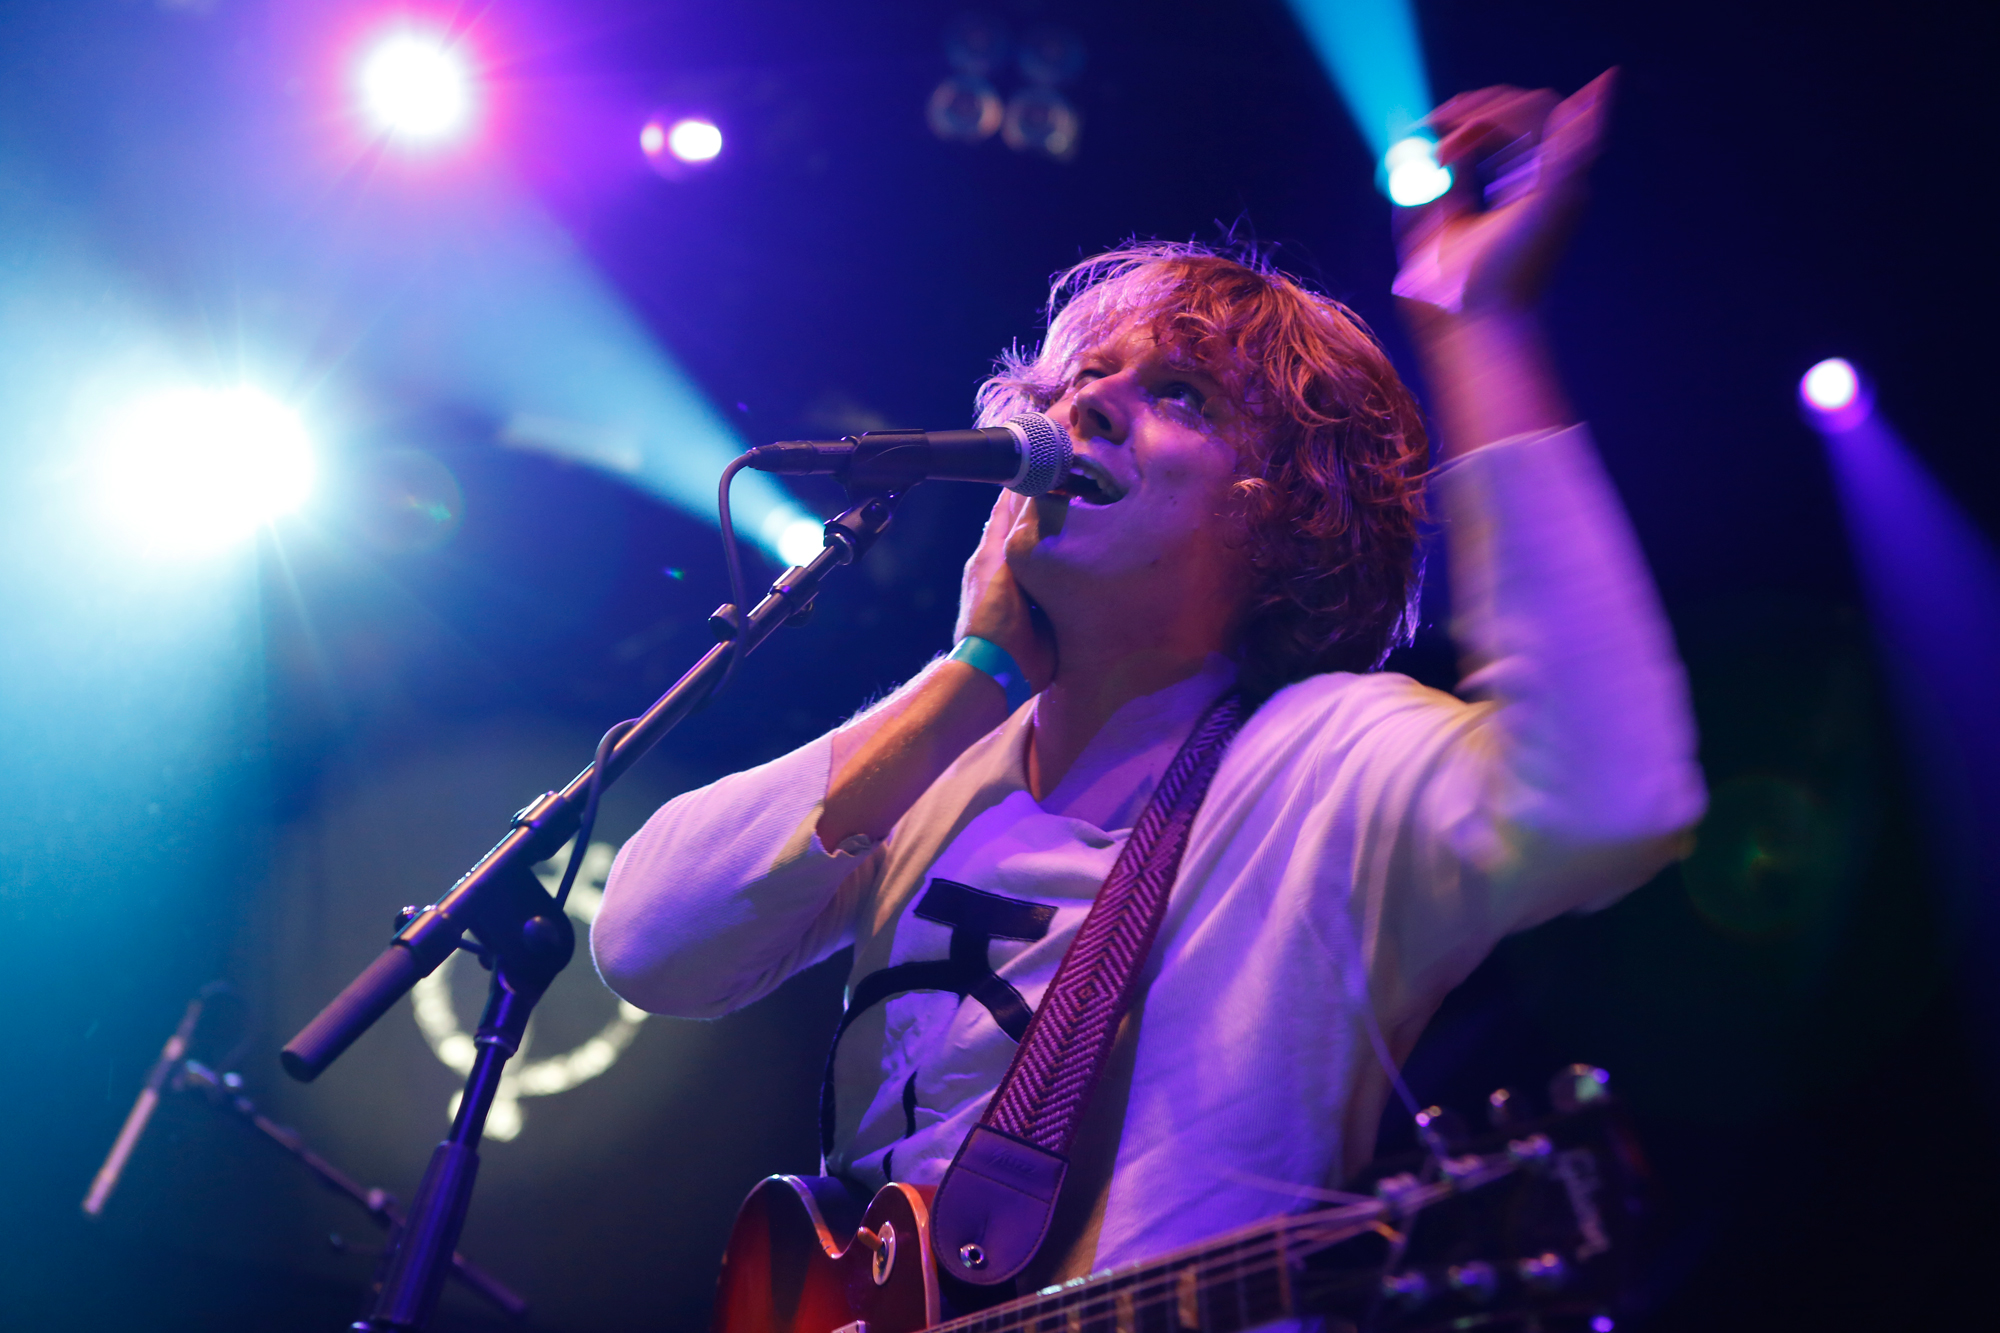 Ty Segall plays at Webster Hall in New York NY on Sept. 18, 2014.